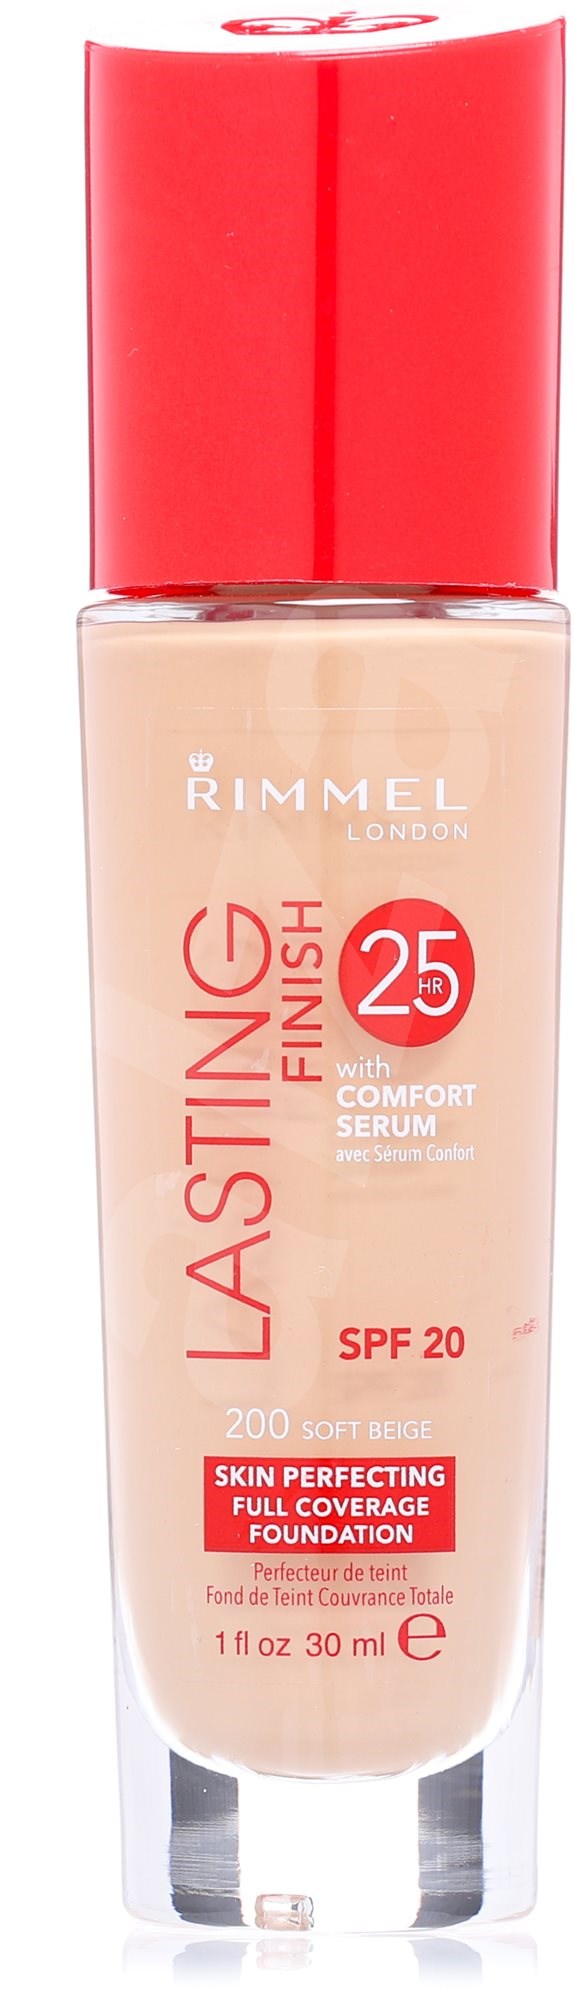 Rimmel Full Coverage Foundation Lasting Finish 25H With 